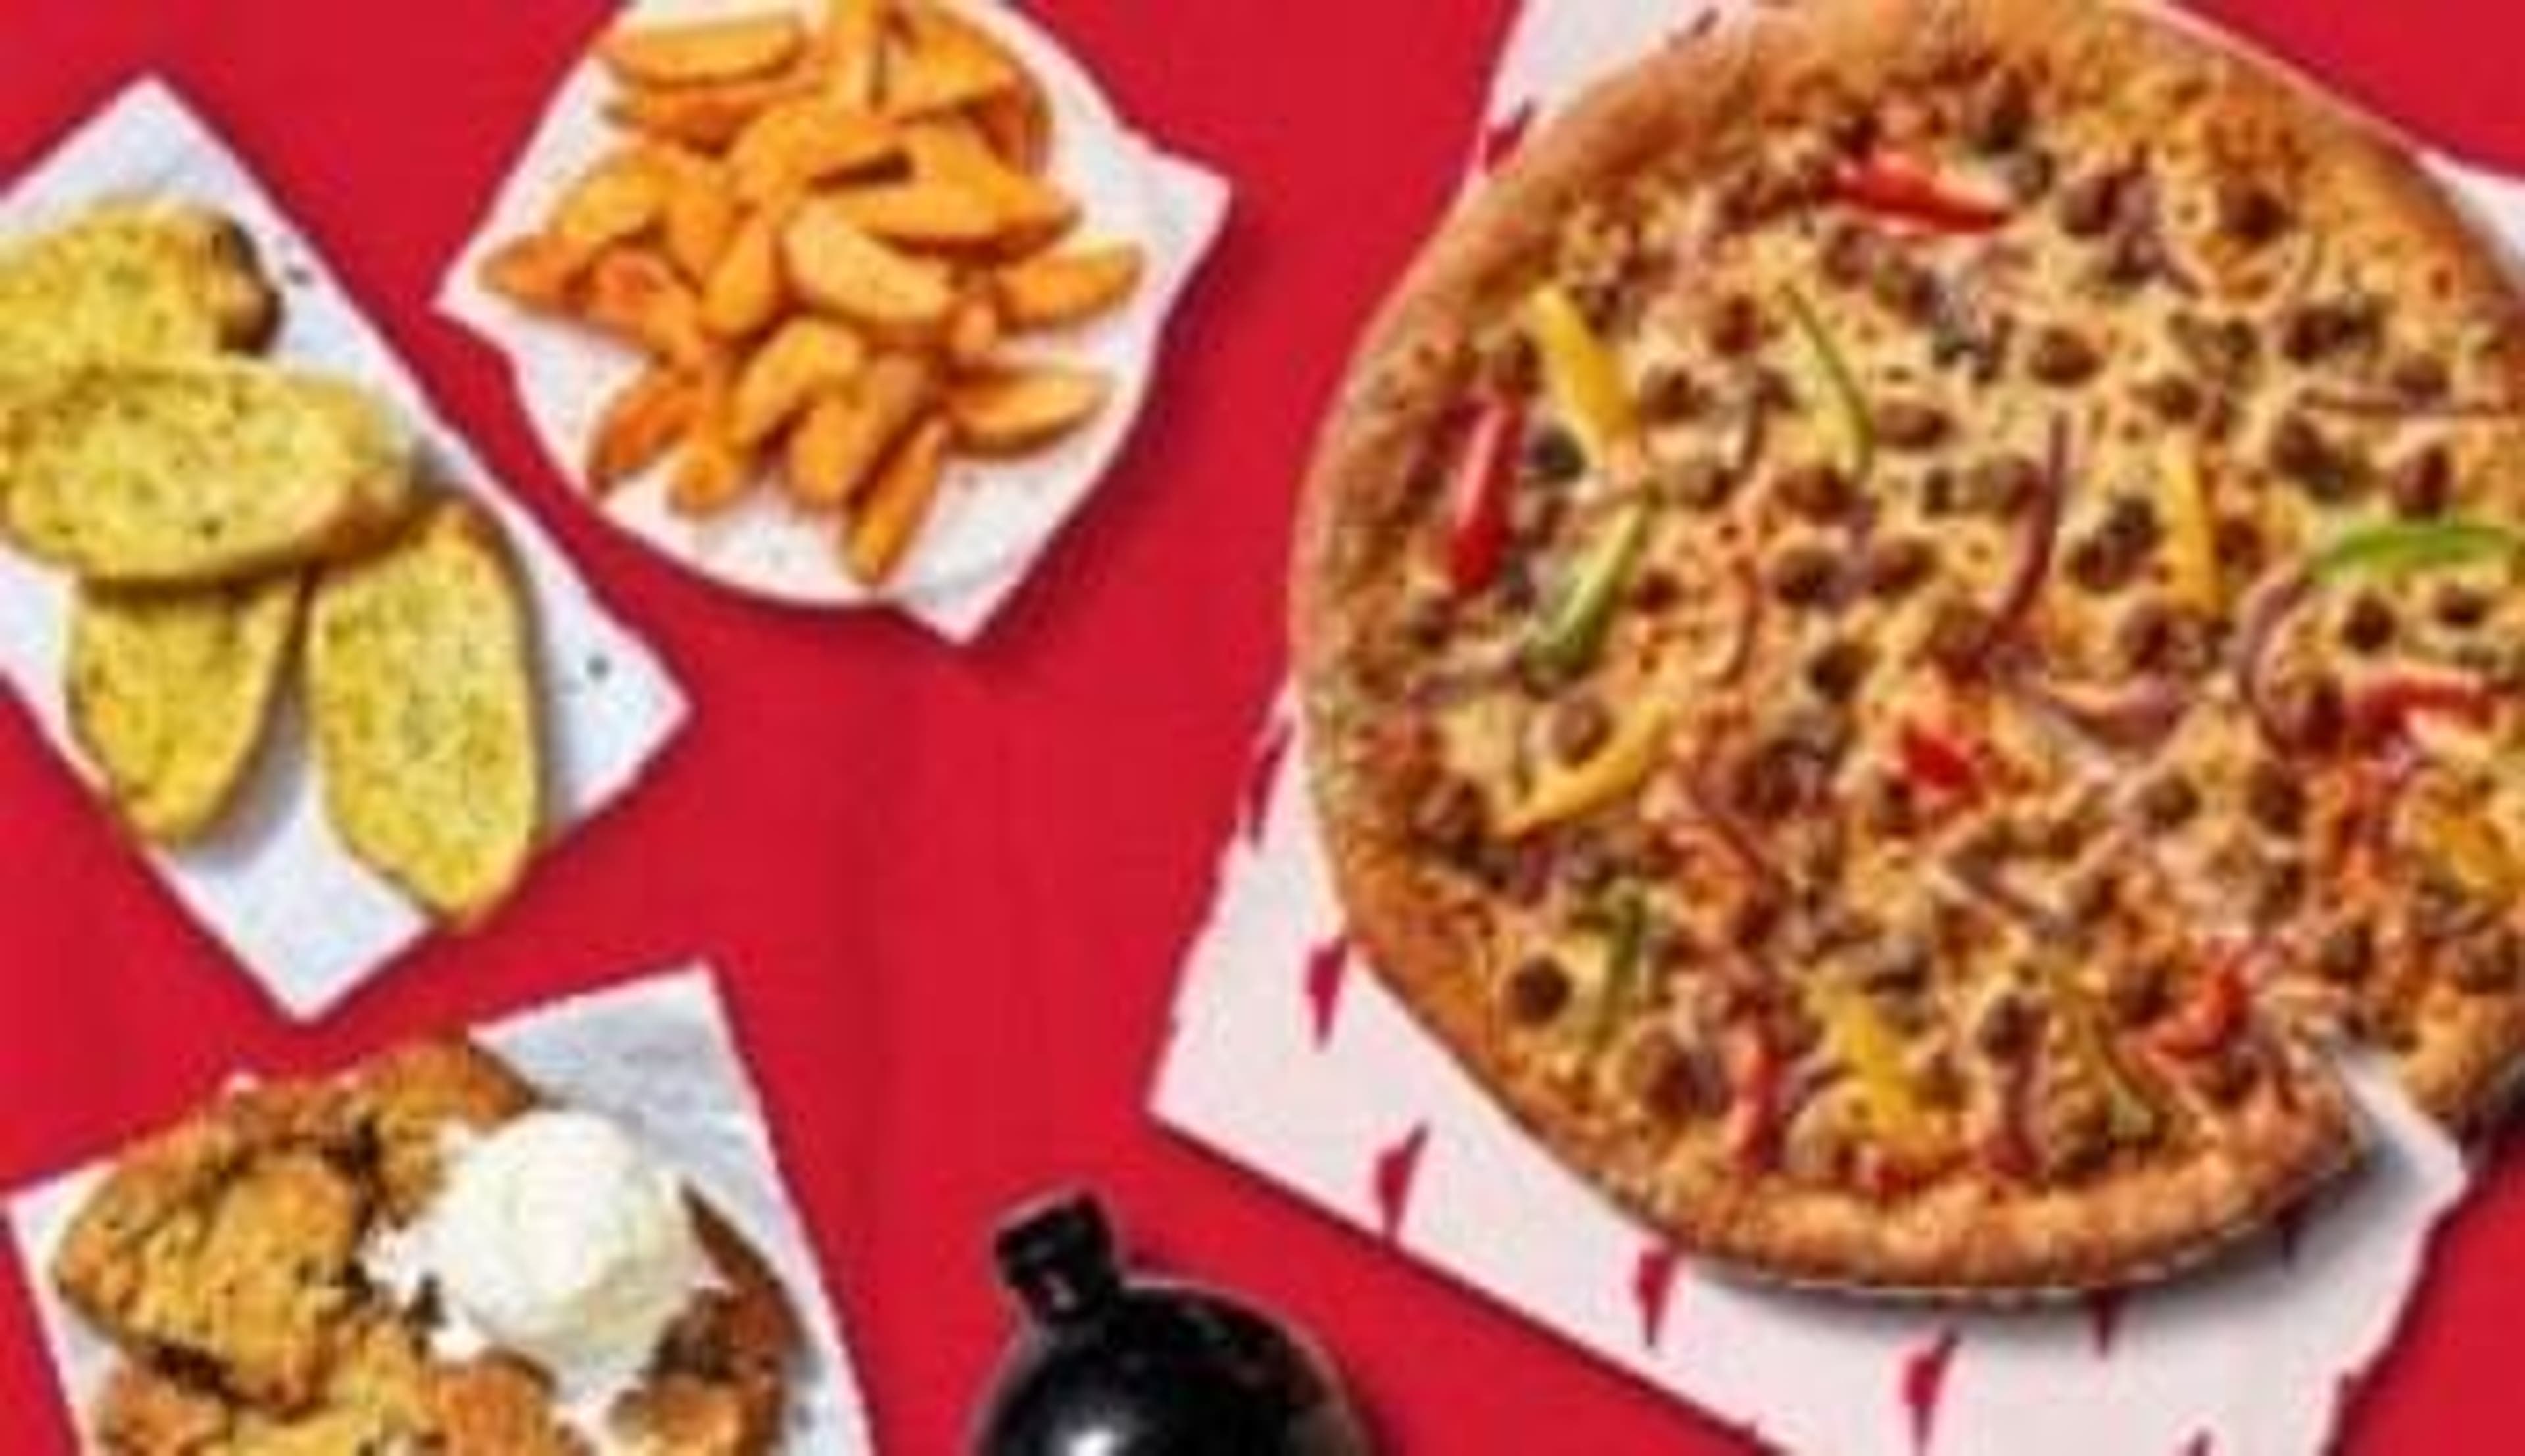  A Selection of Pizza Hut Food 